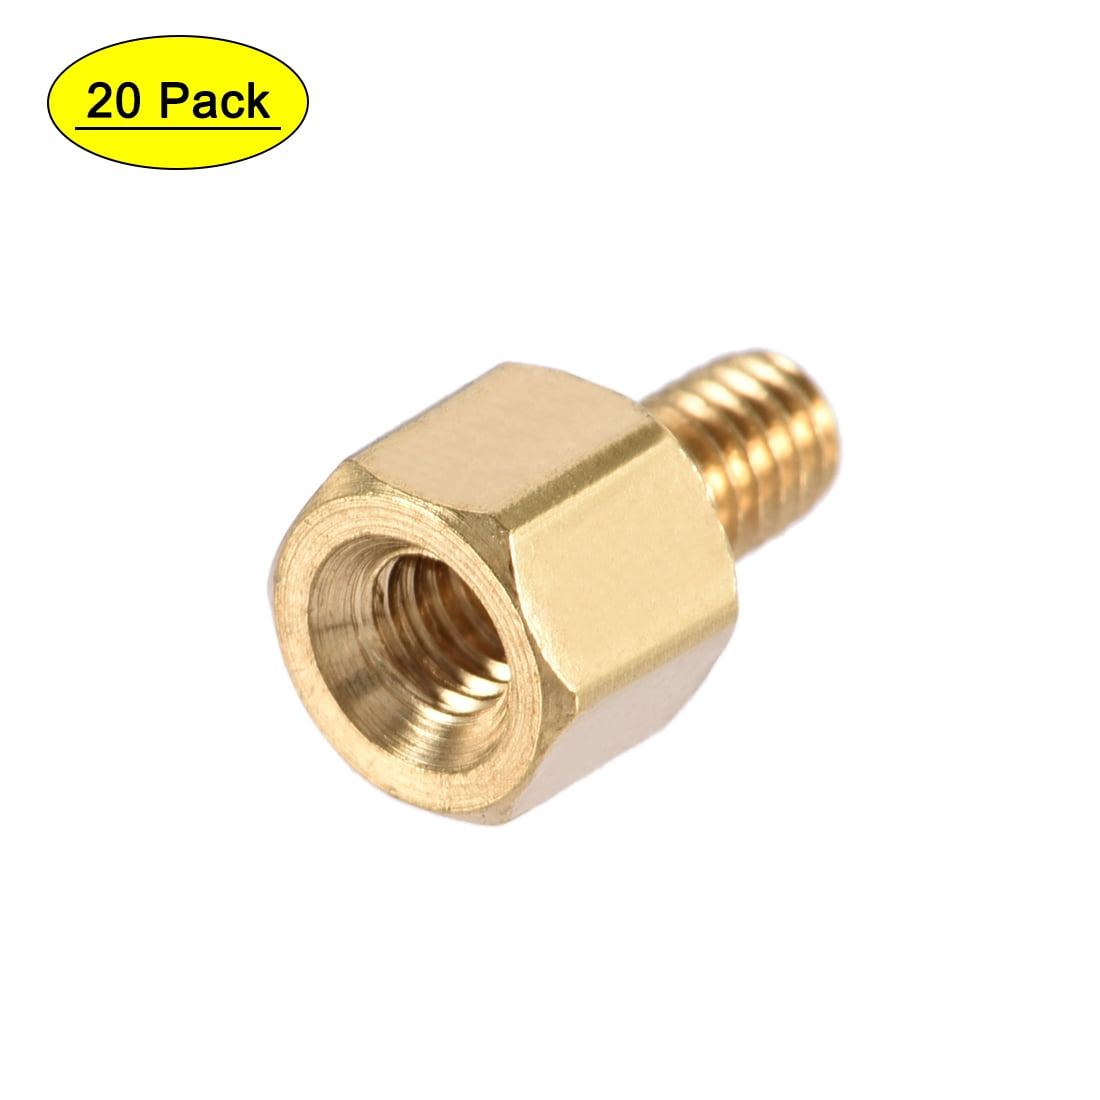 M2.5 x 4 mm 6 mm Male to Female Hex Brass Spacer Standoff 20pcs 